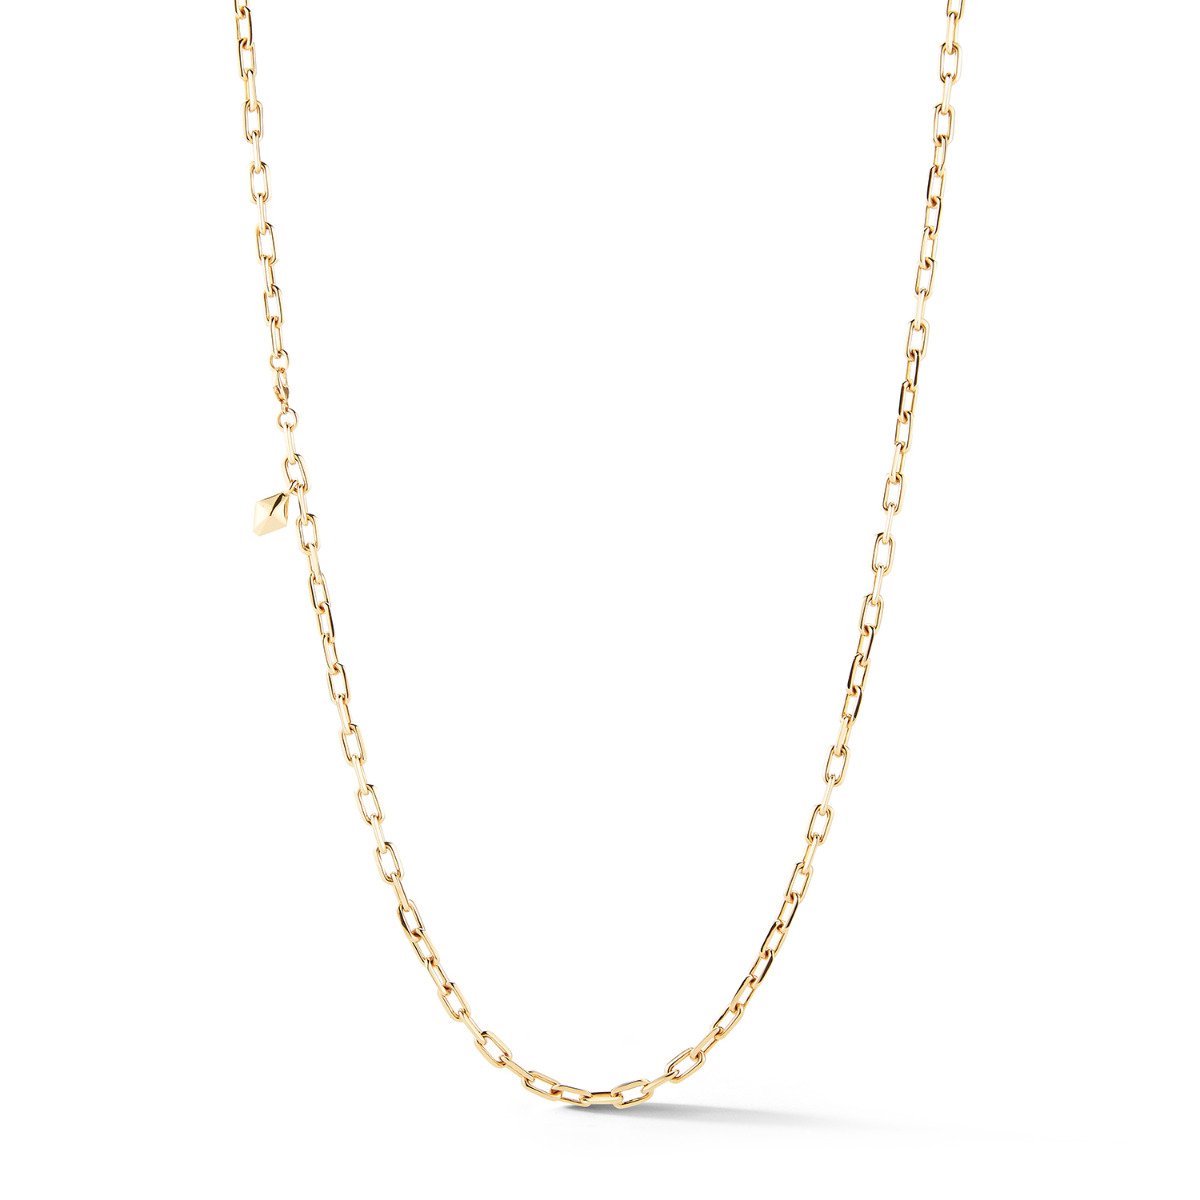 Walters Faith "Saxon" 18kt Yellow Gold Chain Link Necklace